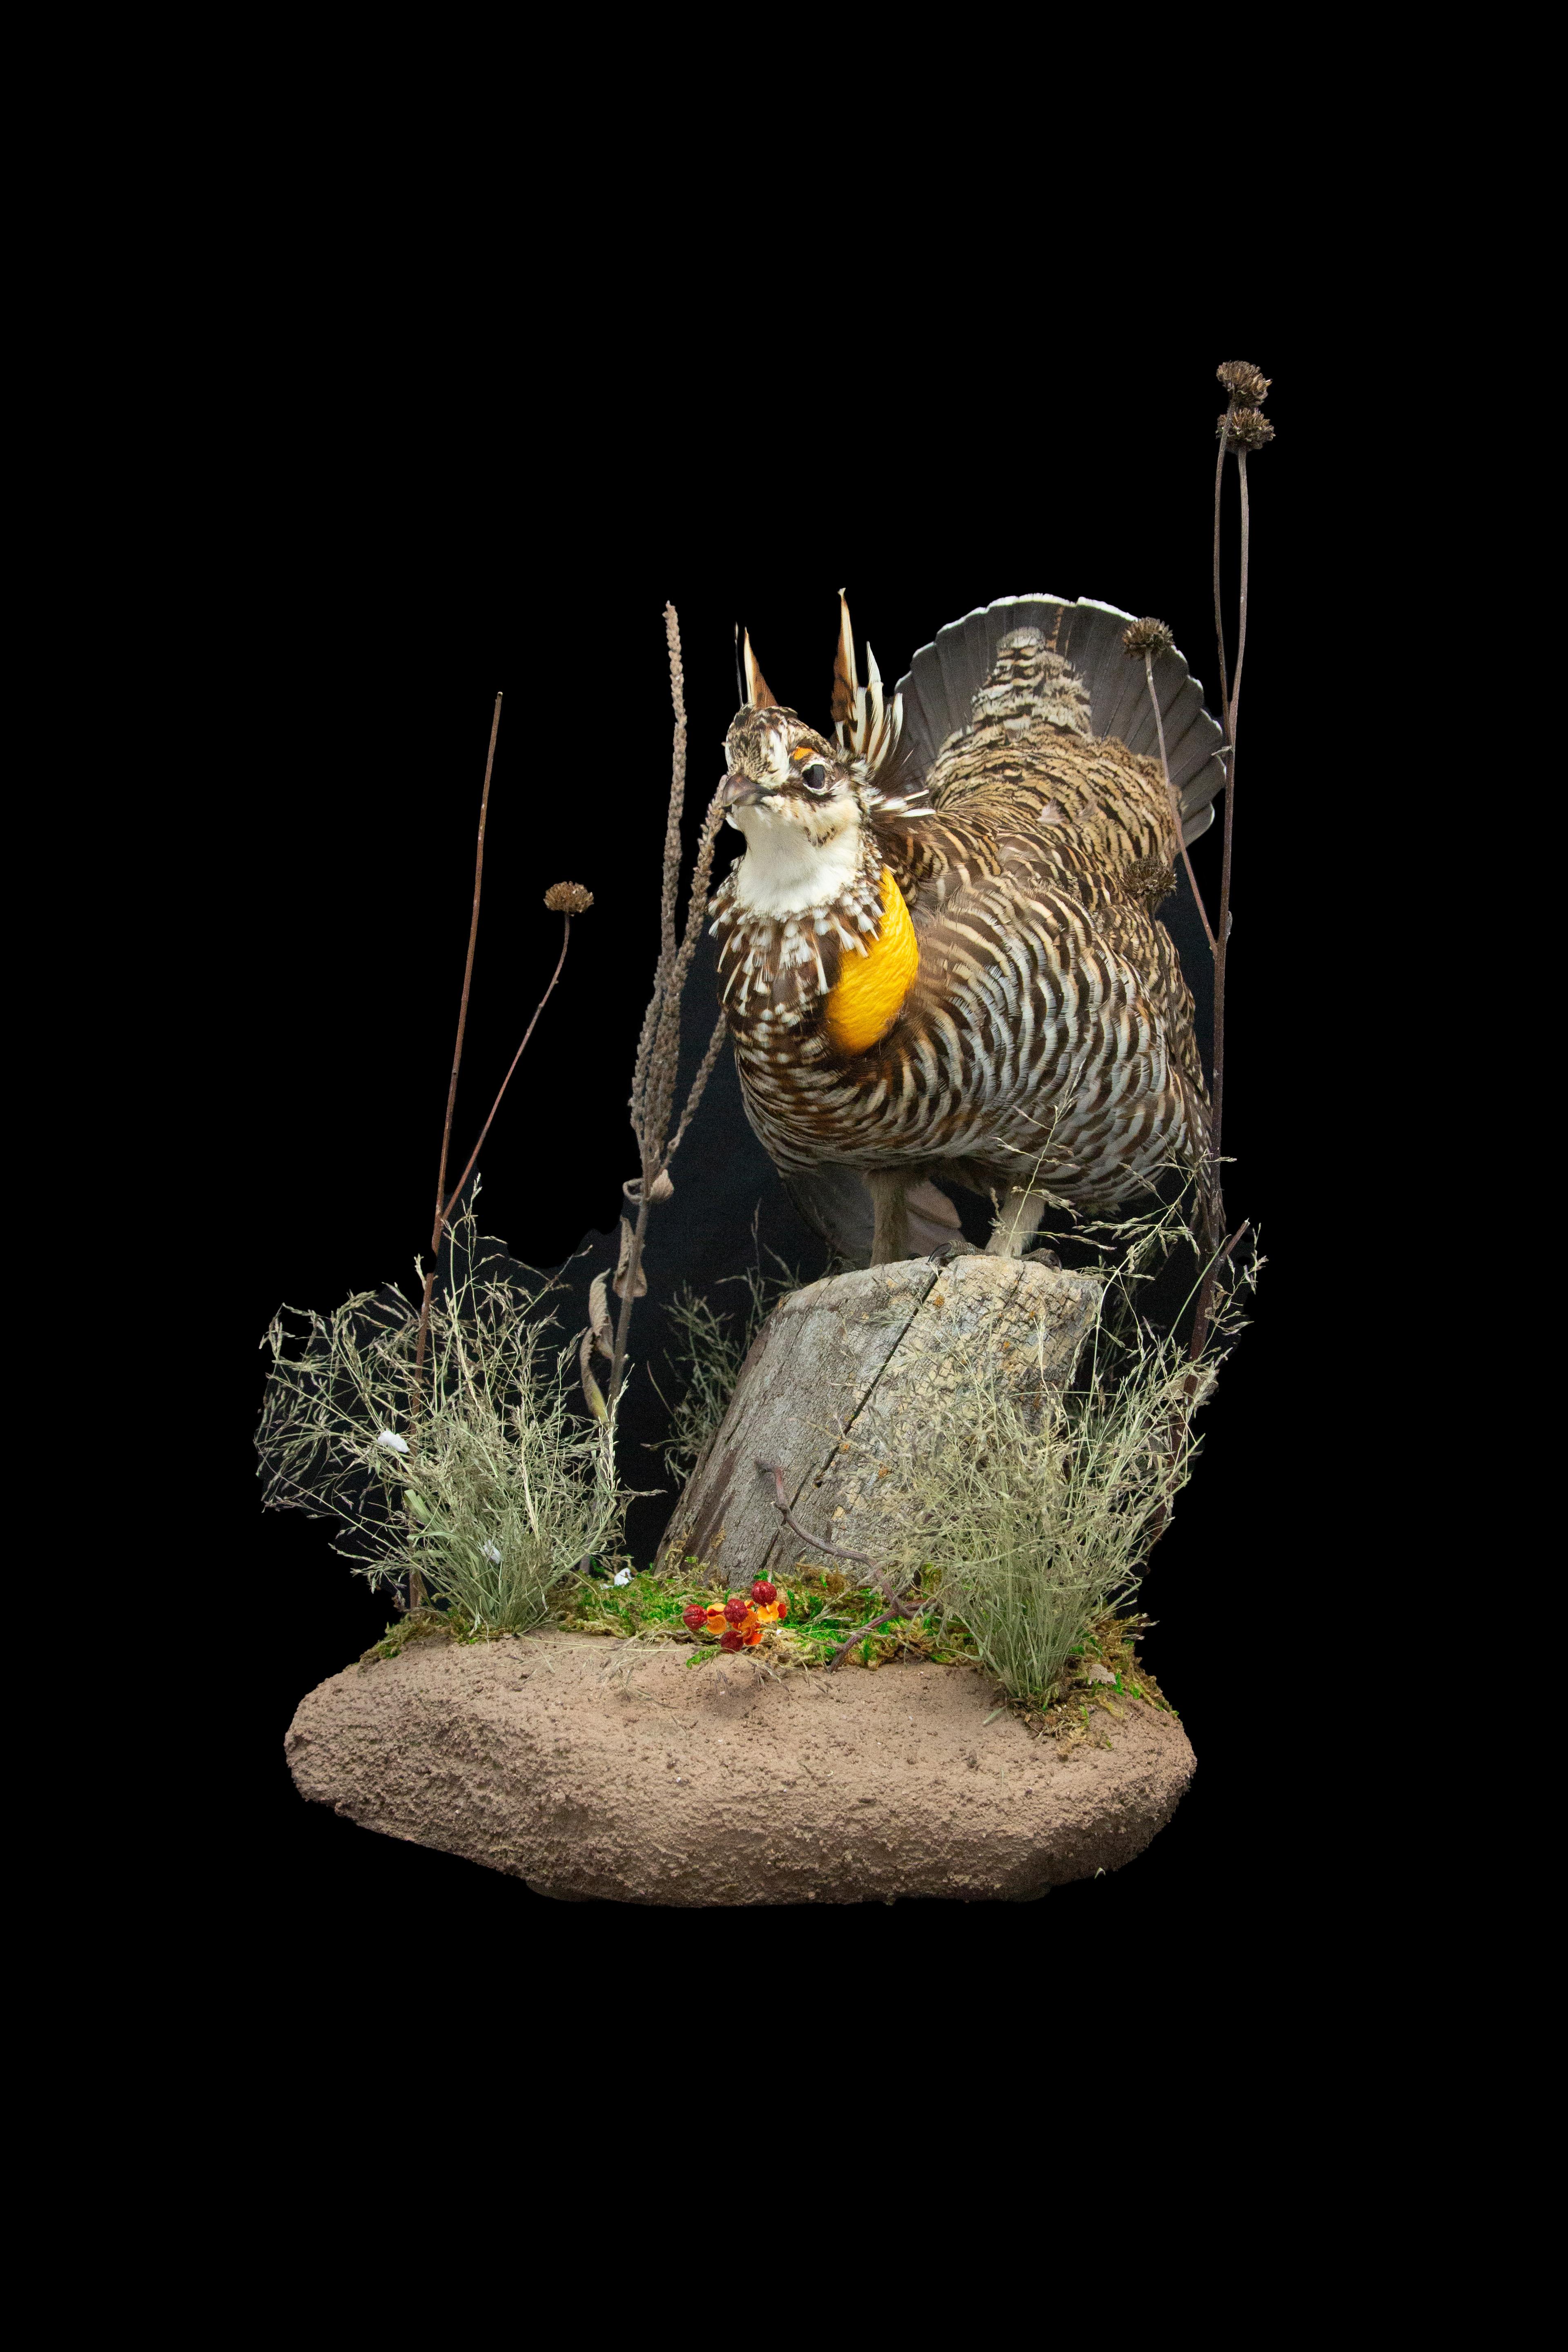 This stunning taxidermy Grouse is mounted on a naturalistic base, creating a lifelike display that showcases the beauty and majesty of this incredible bird. Measuring 13